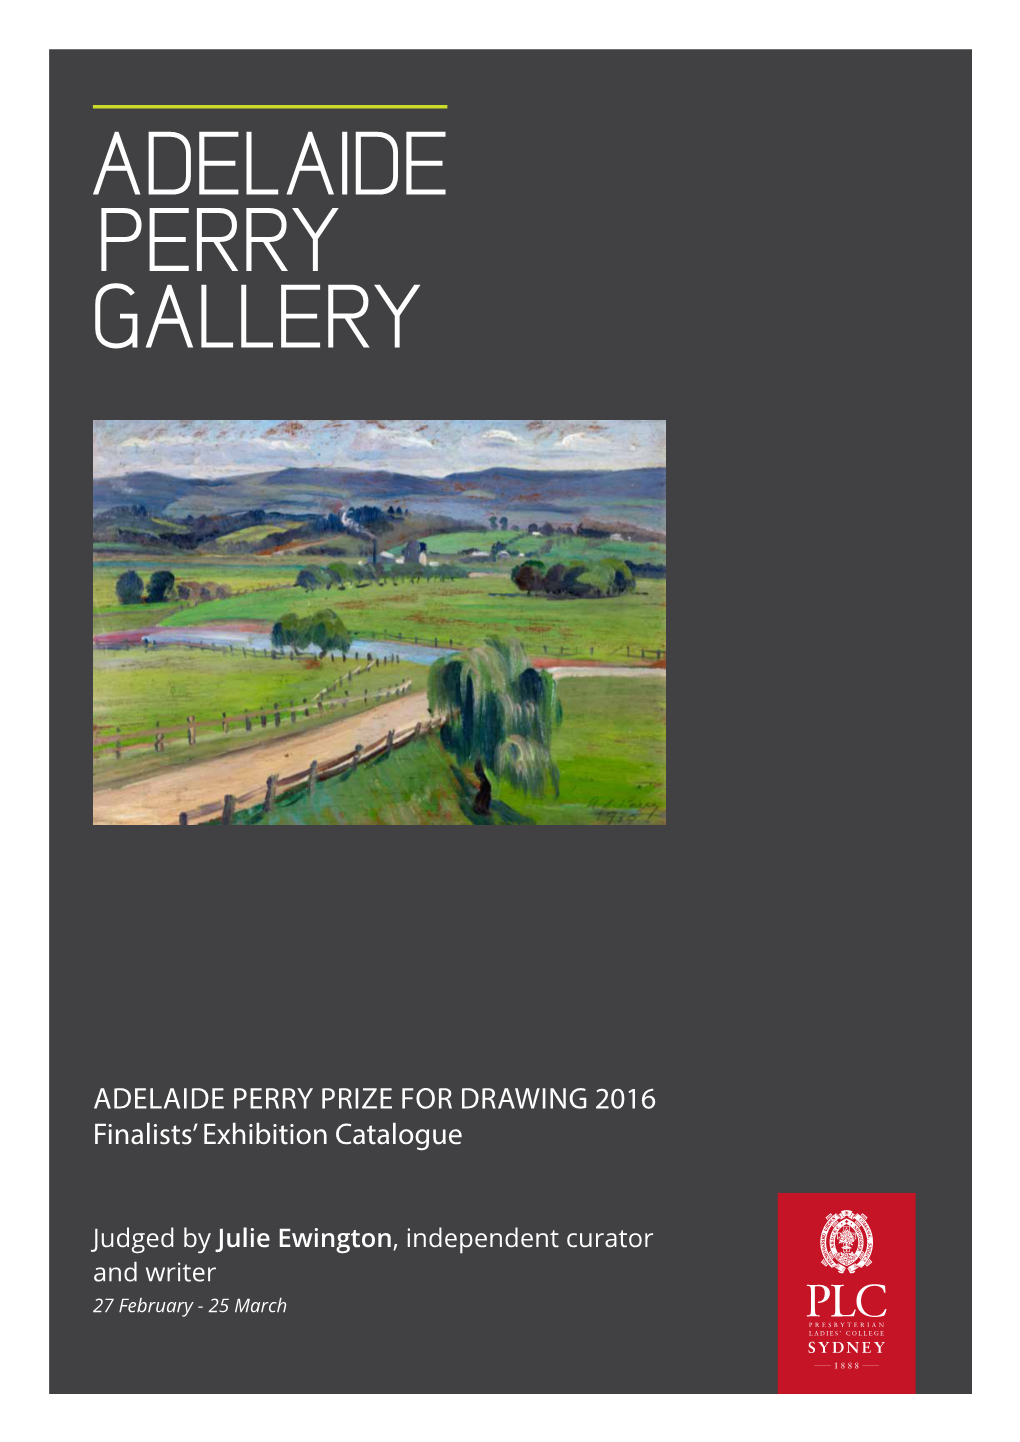 Finalists' Exhibition Catalogue ADELAIDE PERRY PRIZE FOR